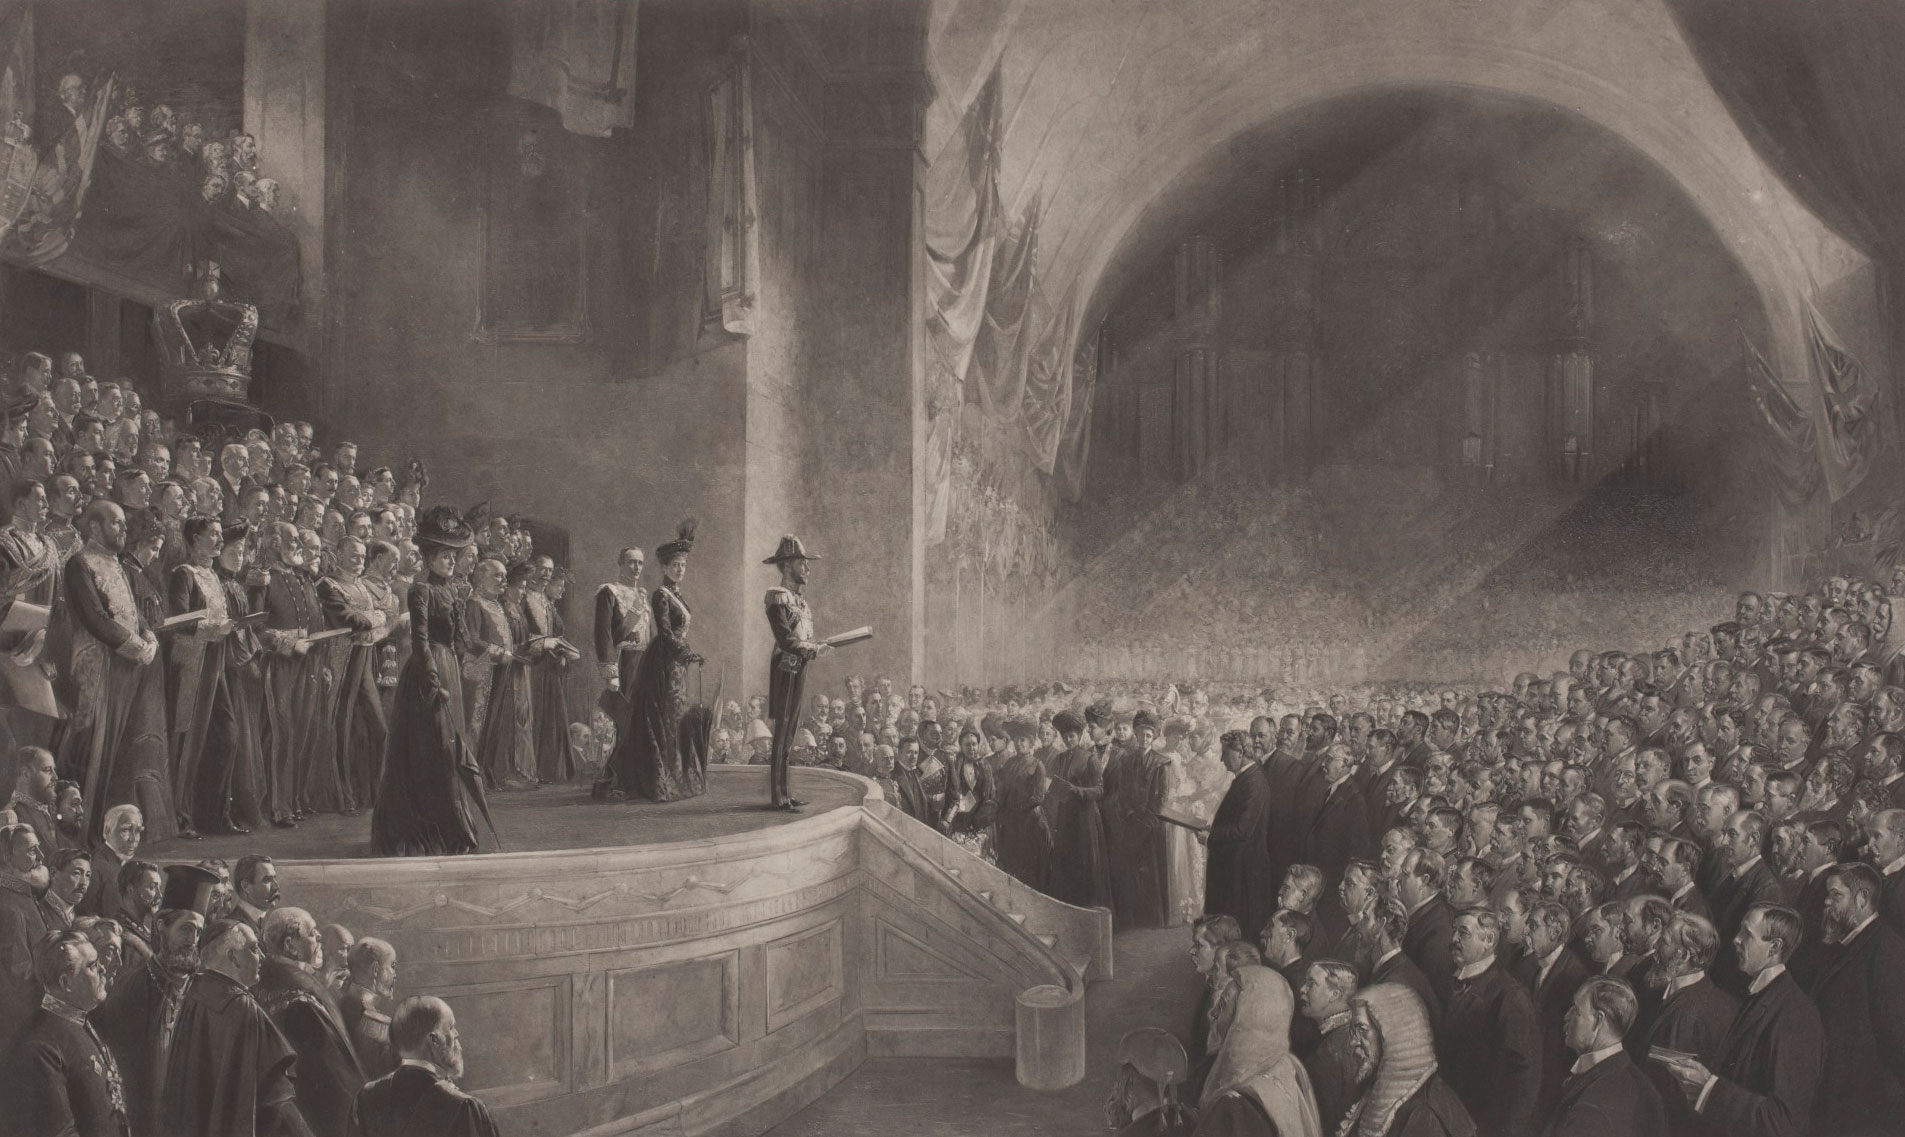 Opening of the First Parliament of the Commonwealth of Australia by HRH The Duke of Cornwall and York (Later HM King George V), May 9, 1901, by Tom Roberts.